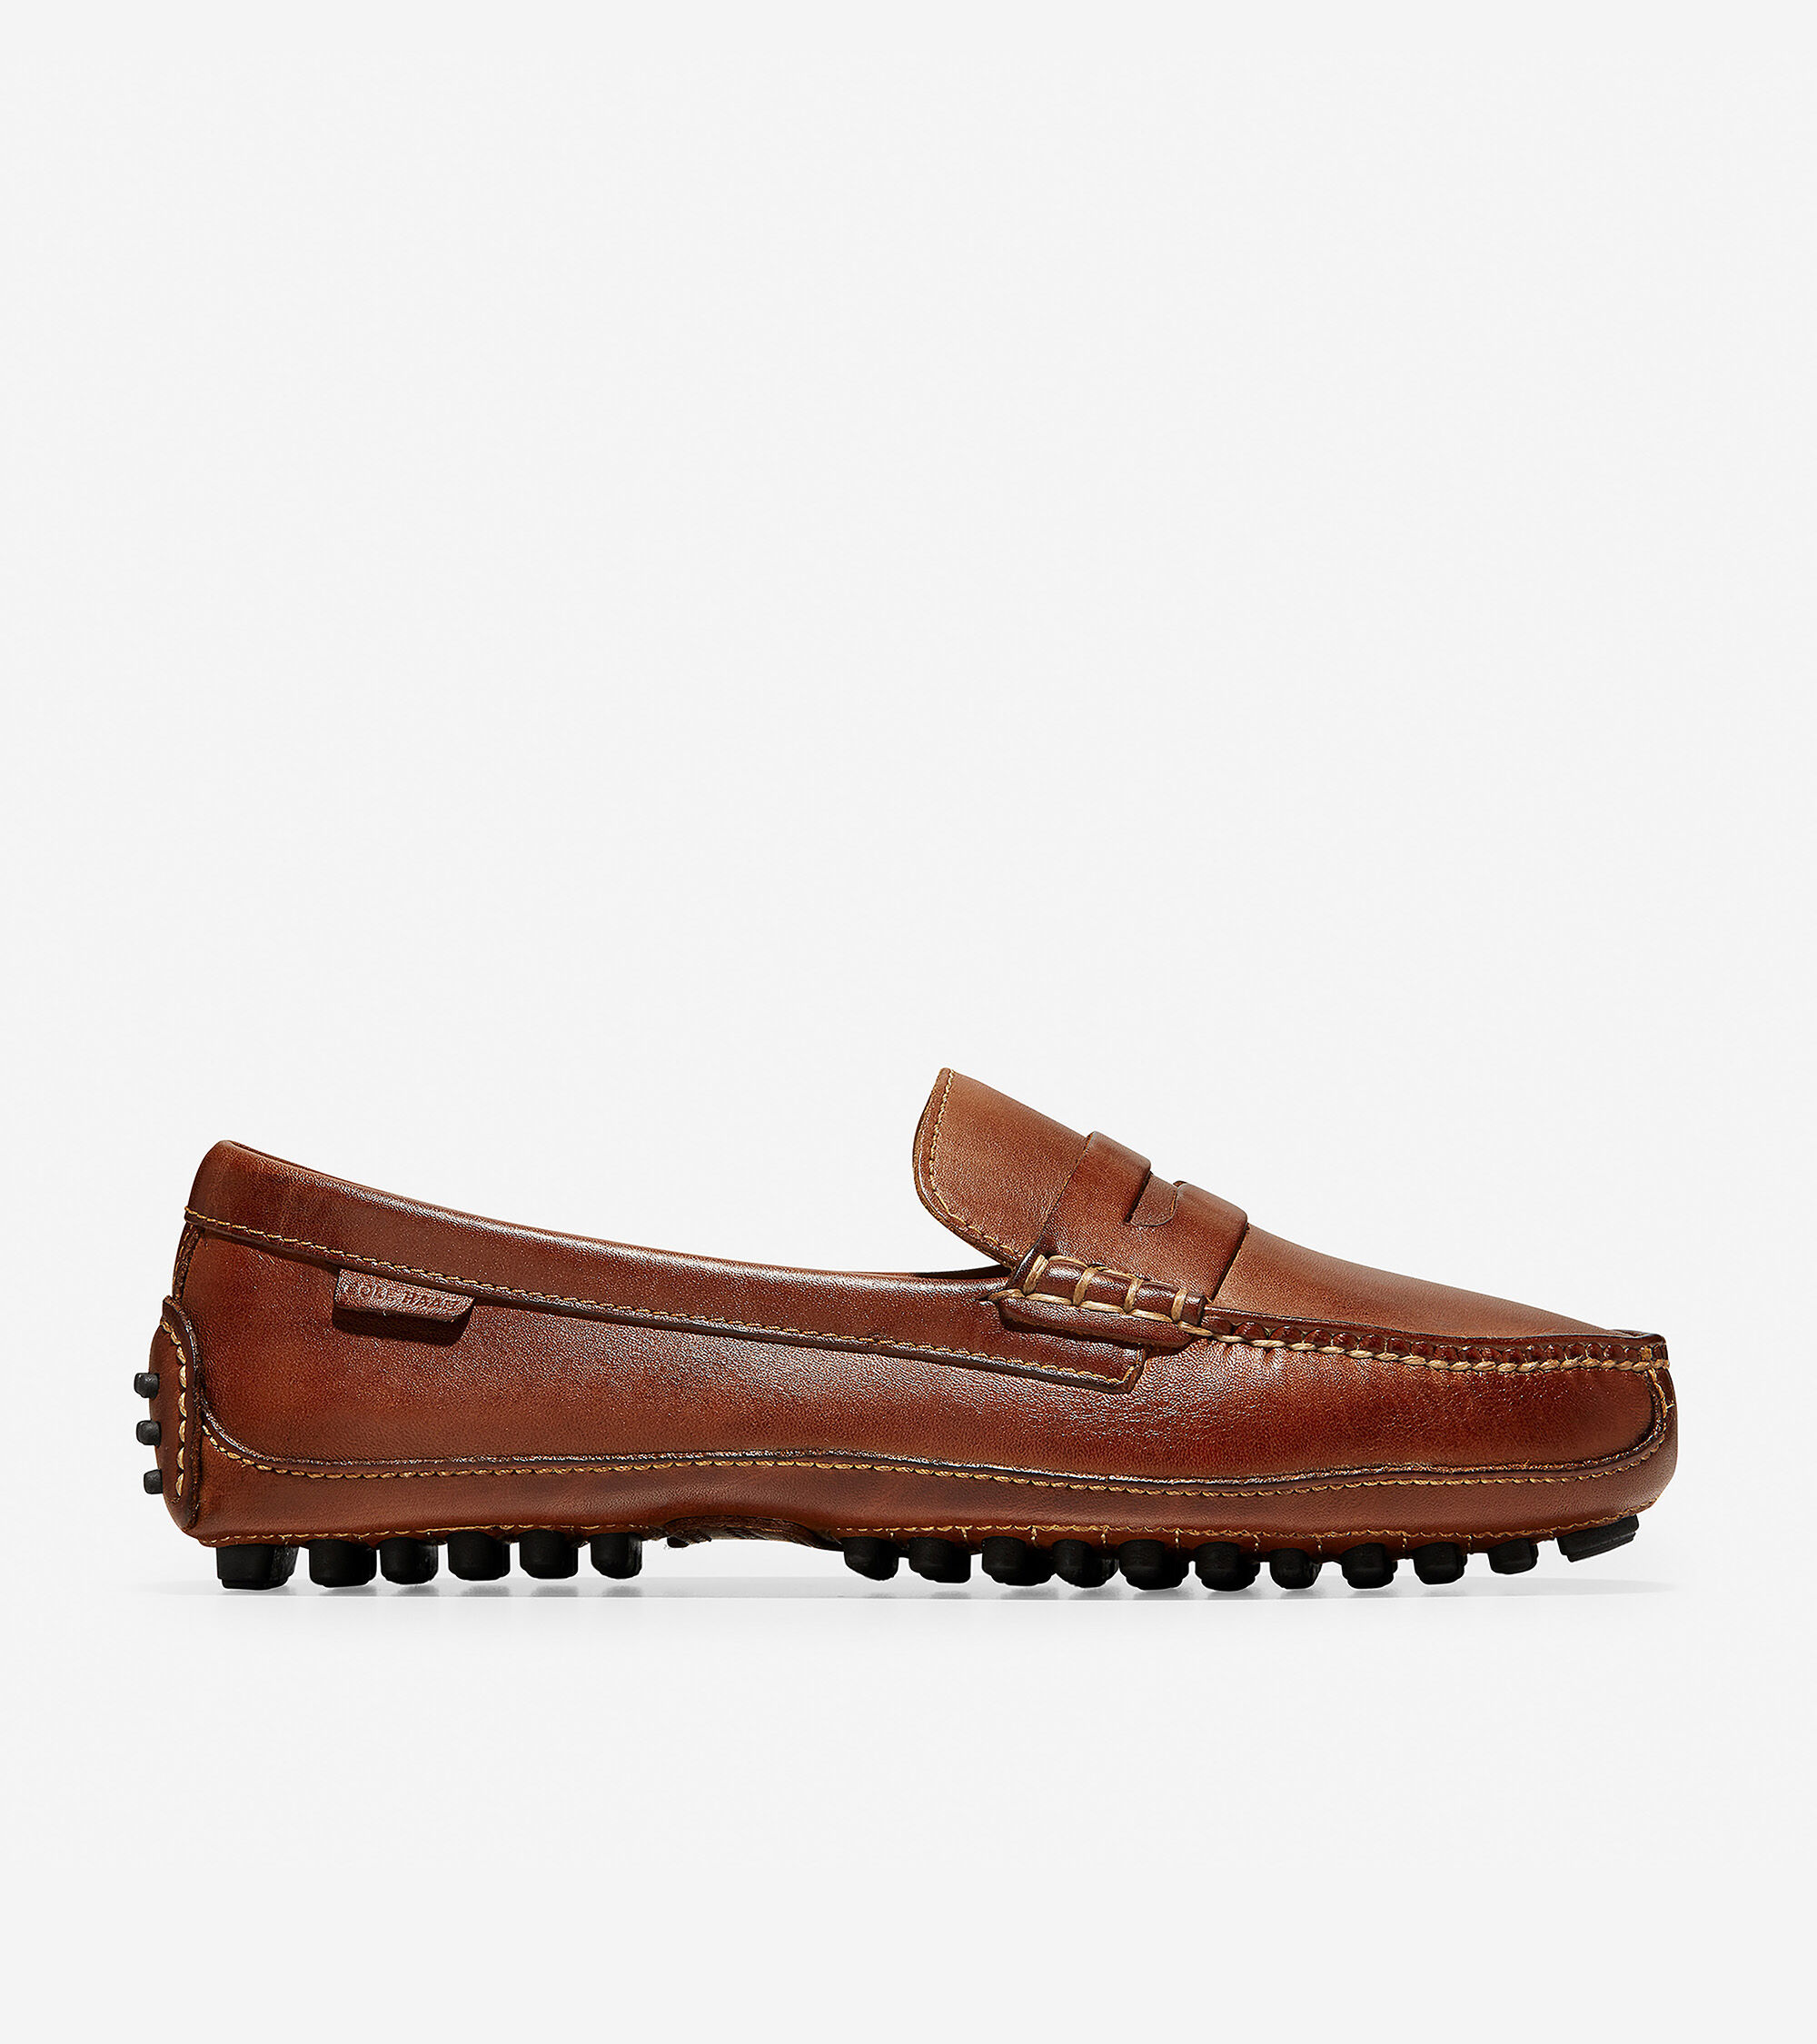 most comfortable penny loafers